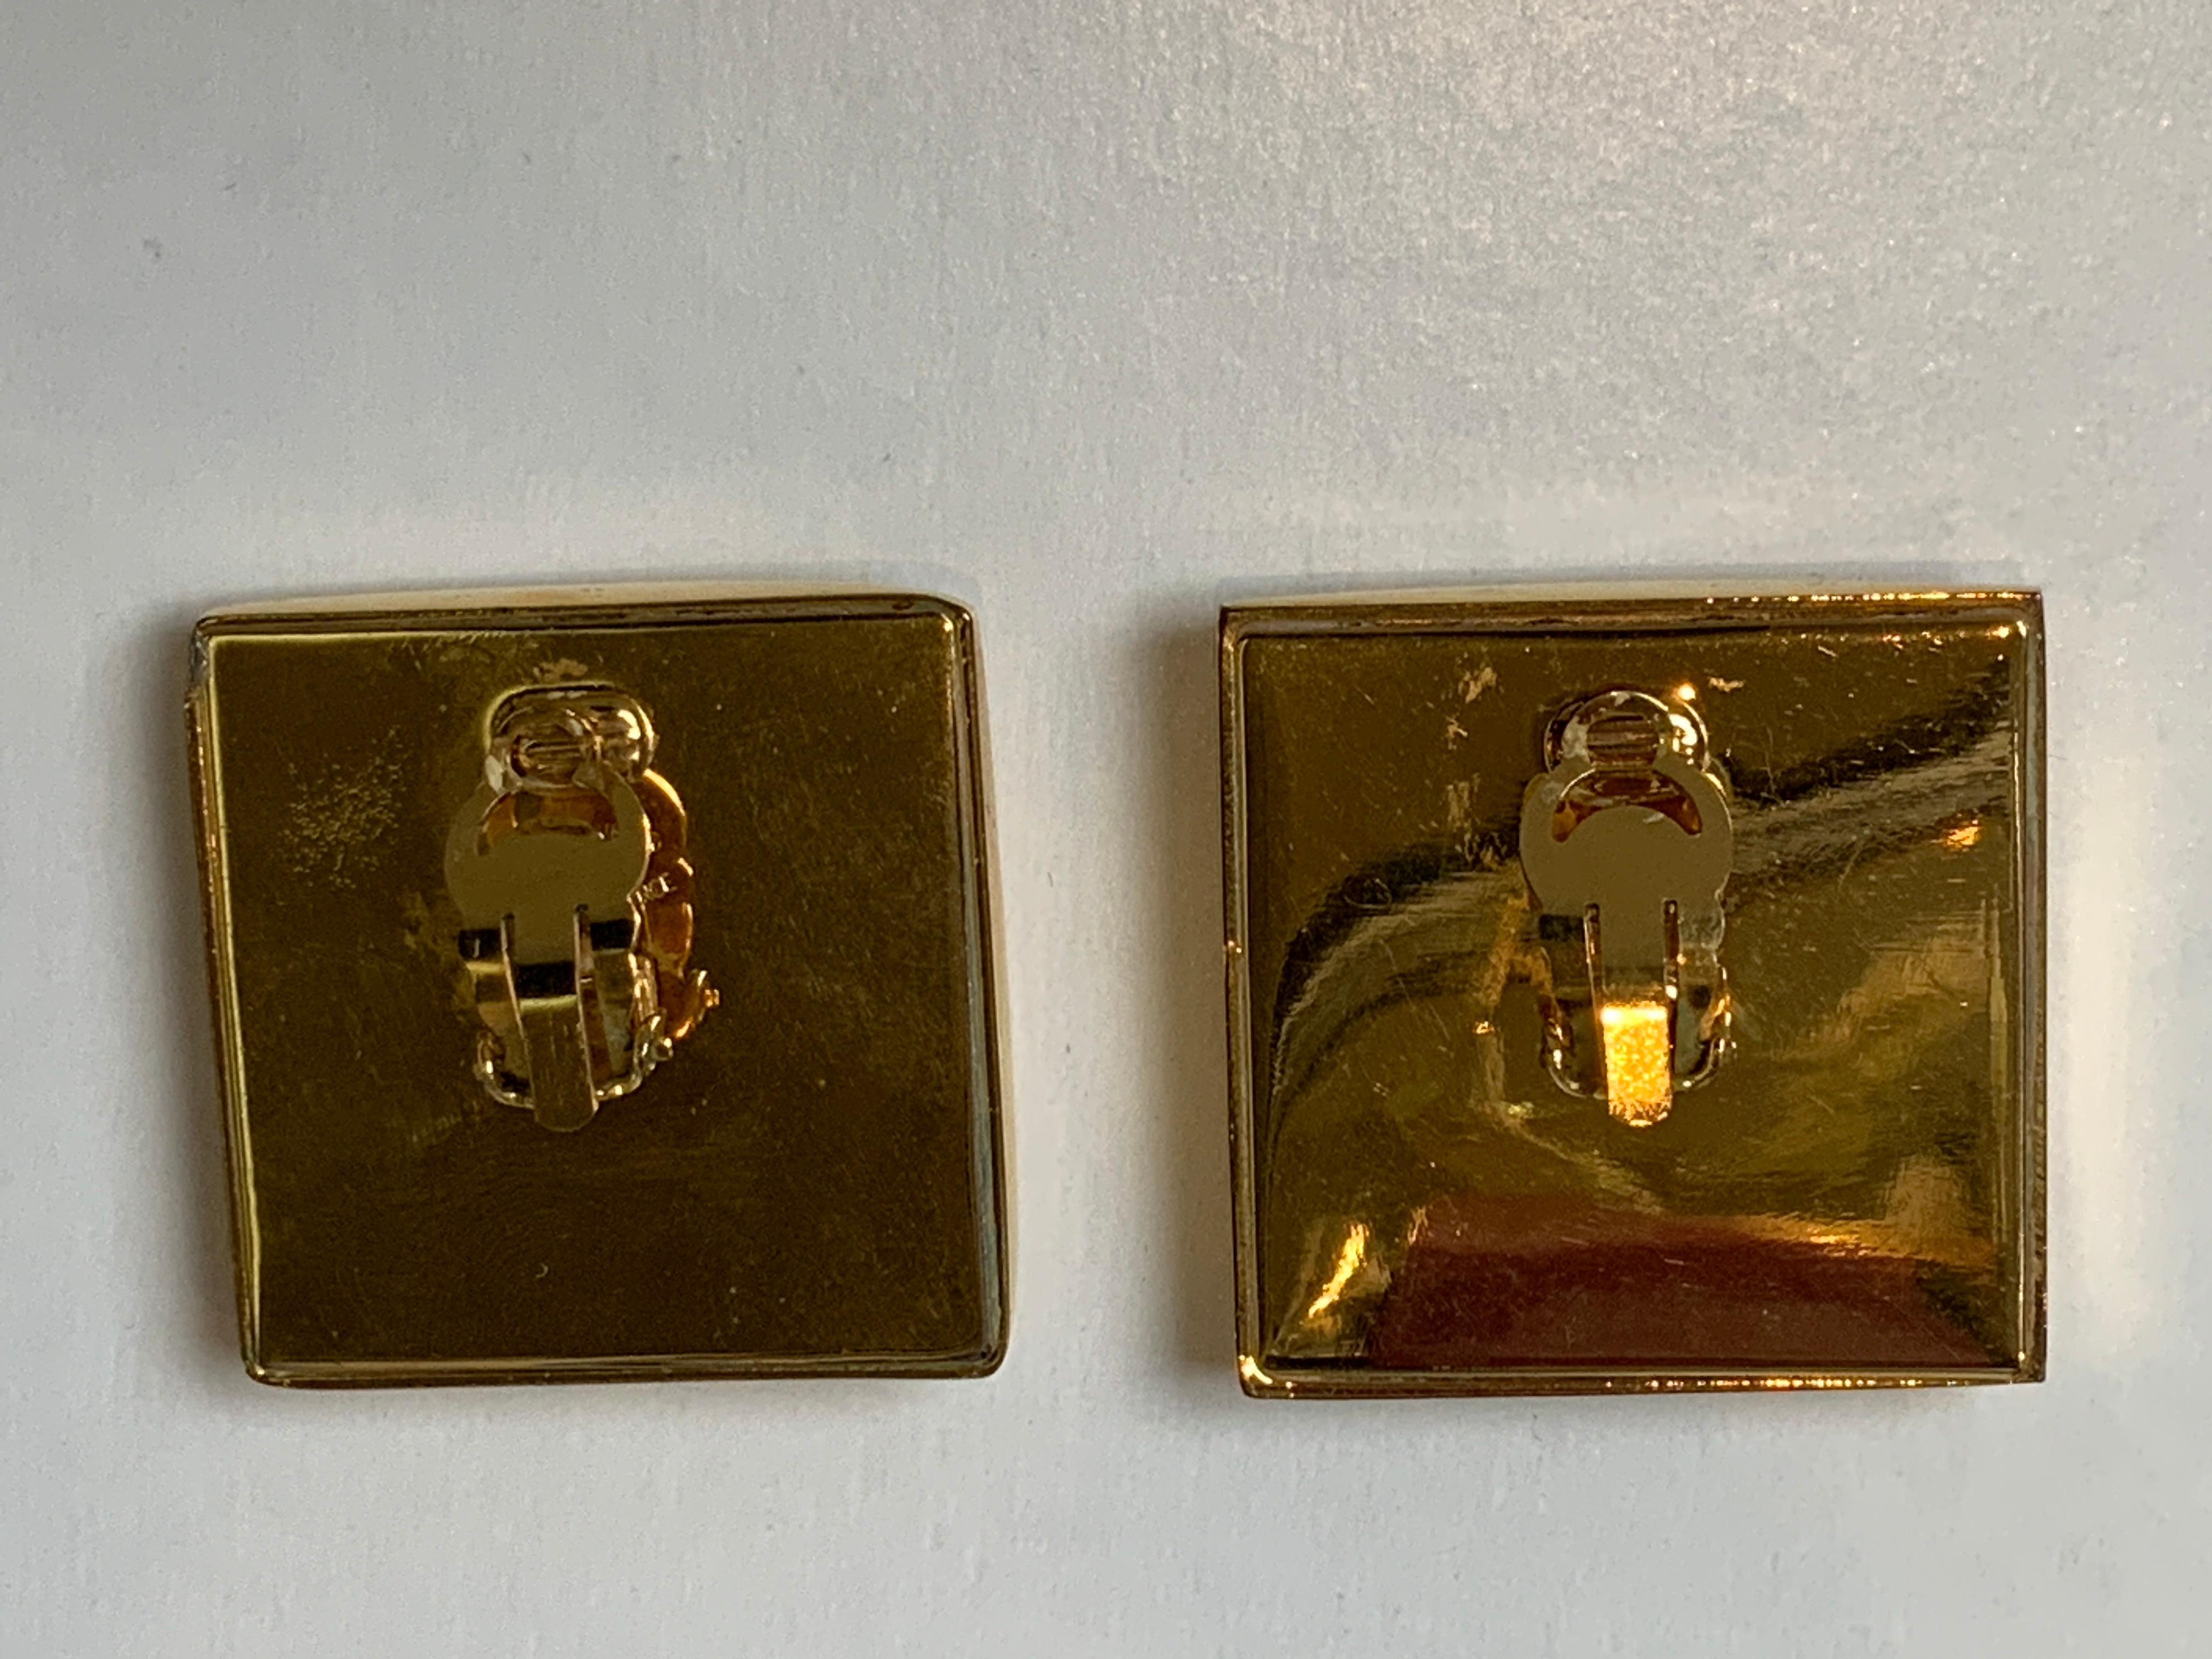 Chanel XXL 24k gold plated square CC statement earrings with decorative screws at the corners and blackened CC’s. Earrings are clip ons. Construction is hollow and they are lighter than they look. Made in France. Excellent condition. They measure